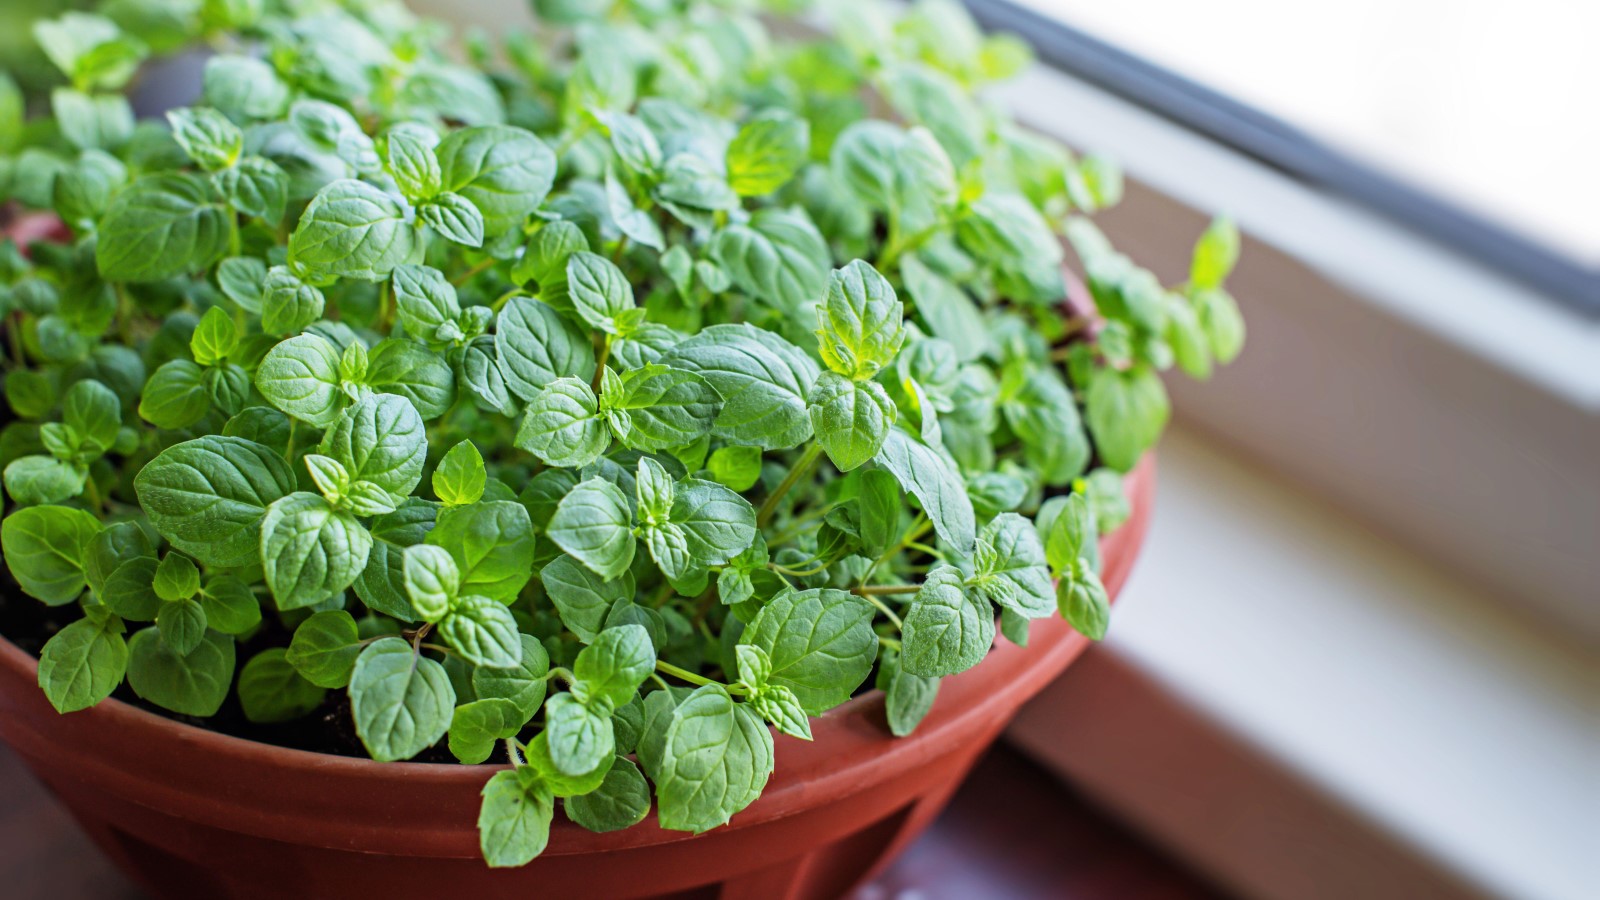 How to Grow and Care For Chocolate Mint